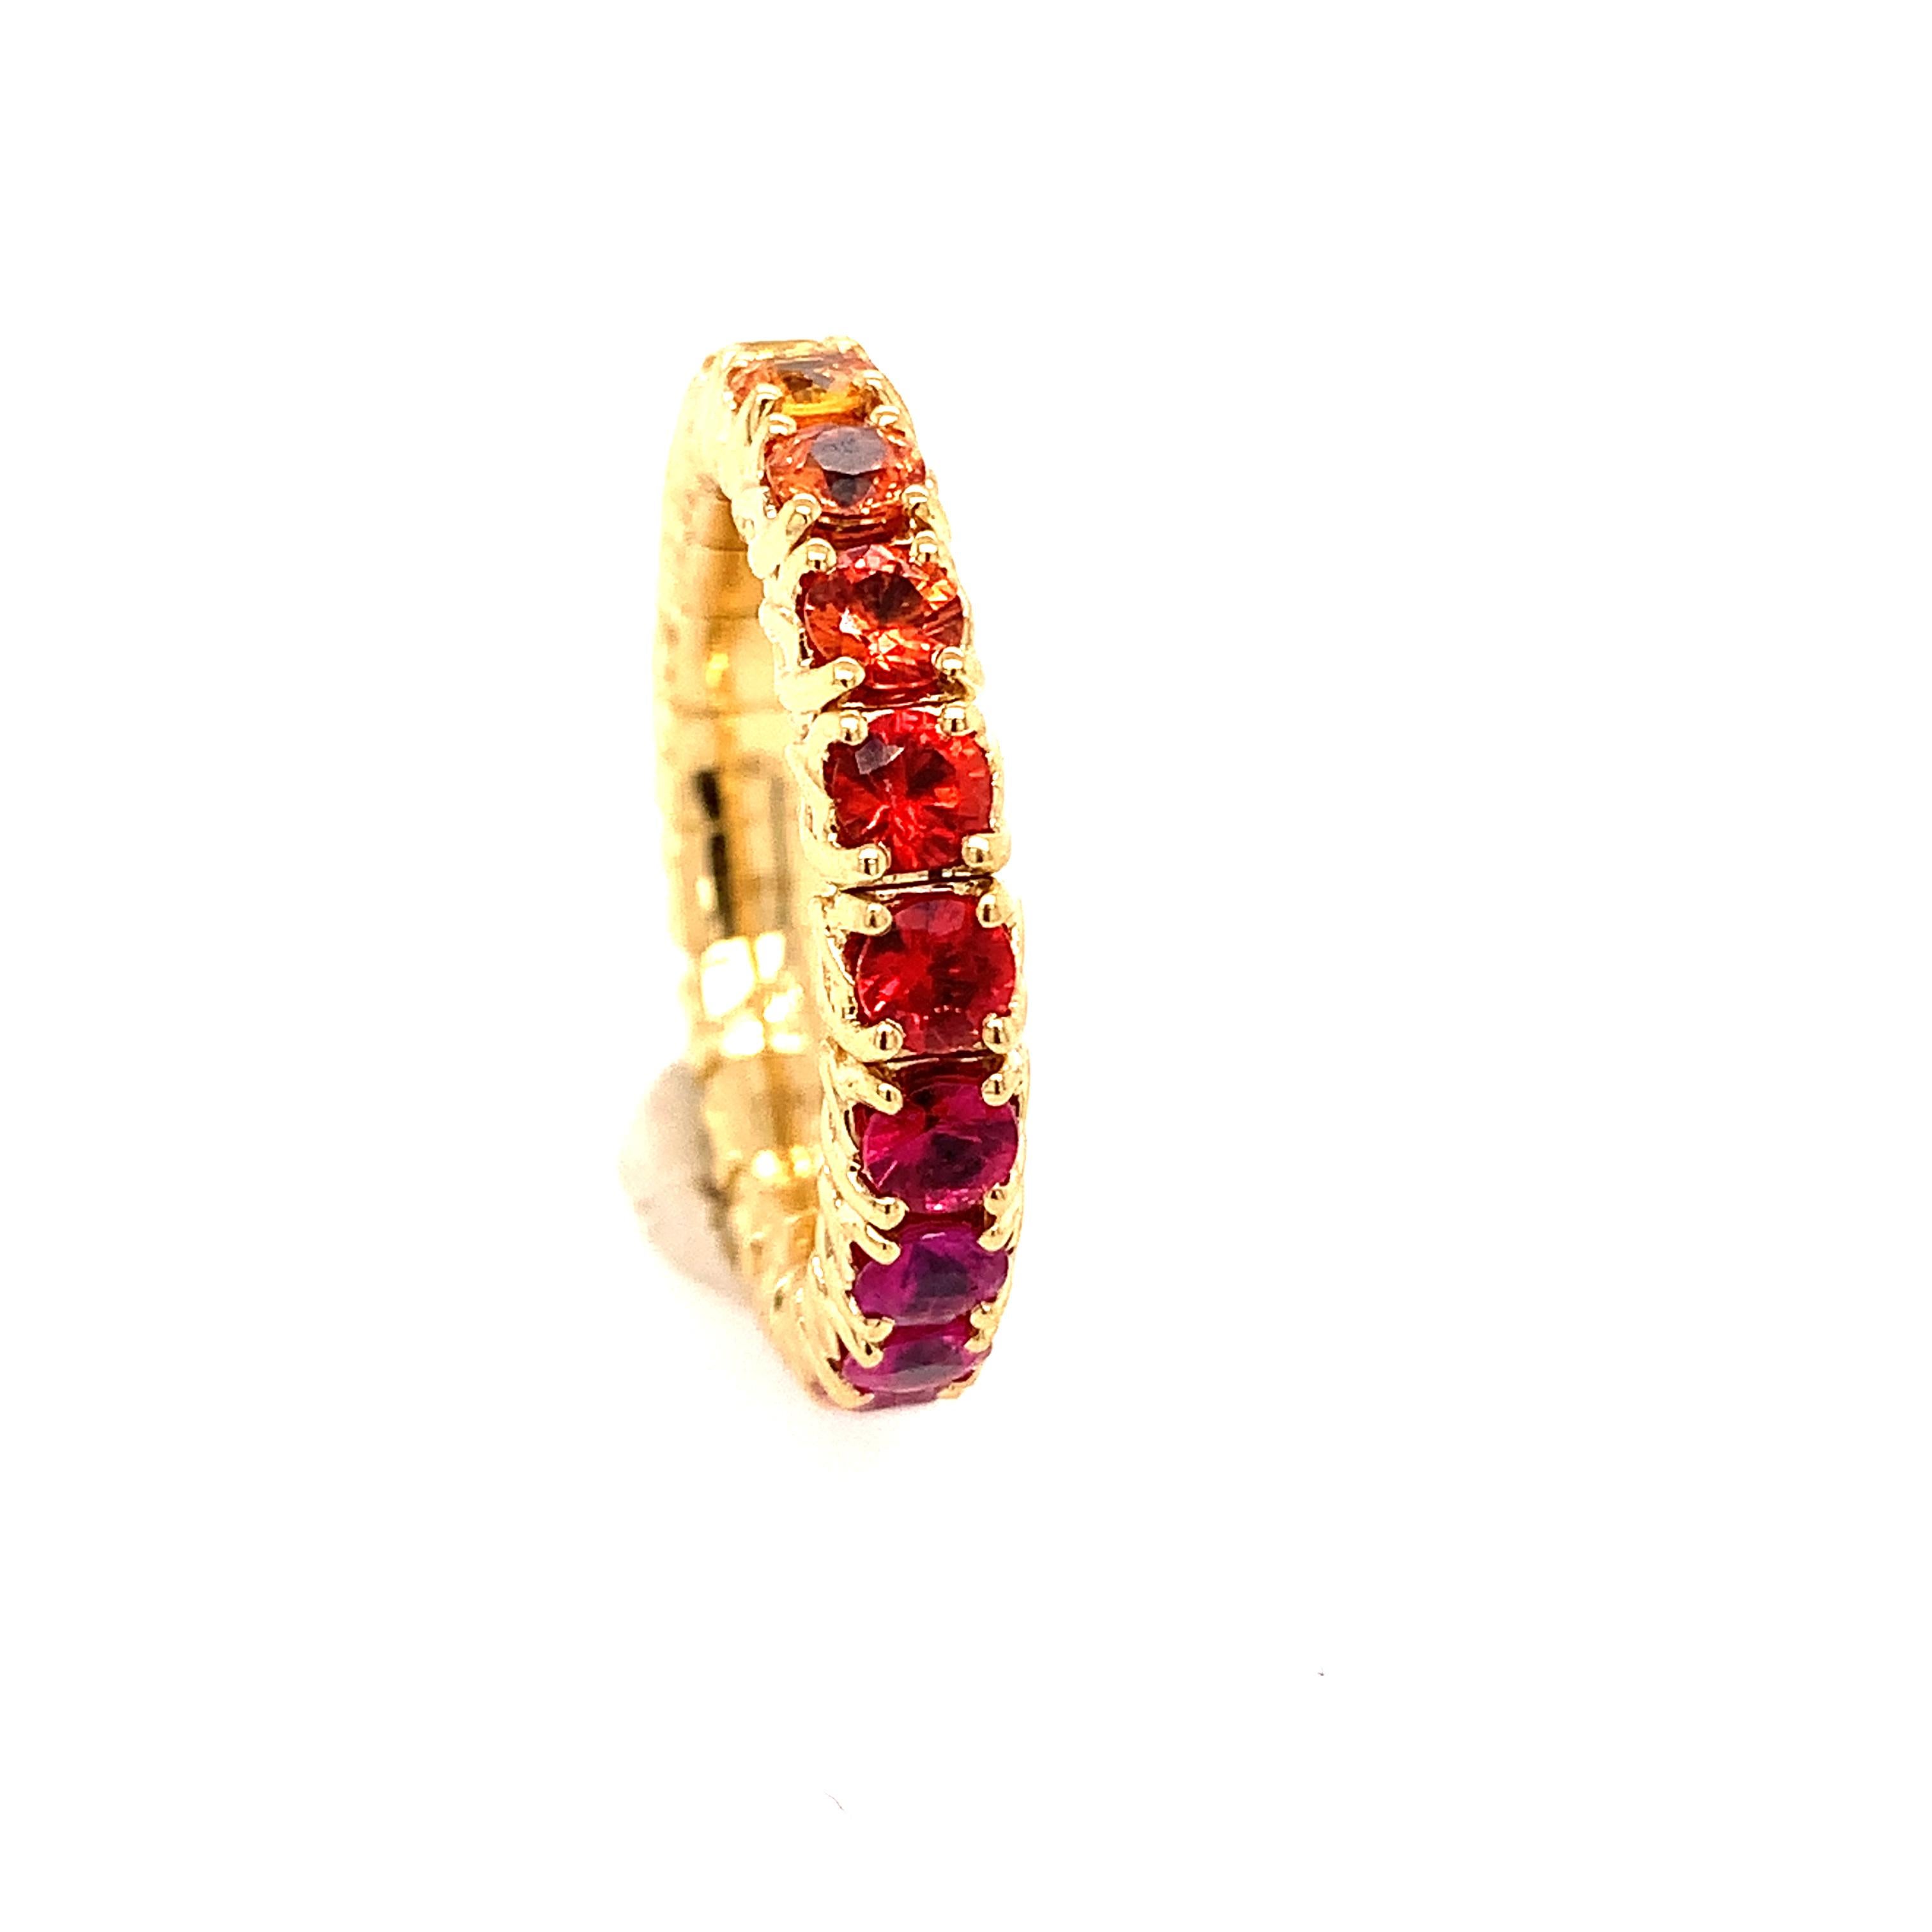 18KT Yellow Gold  RING RAINBOW SAPPHIRES 
A no brain ring, happy, fancy, a confortable ring that stretch from size US 6 to US 8 = from size 52 to 56 EU
18kt GOLD  : 5,11
MULTICOLOR SAPPHIRES ct  : 2,83